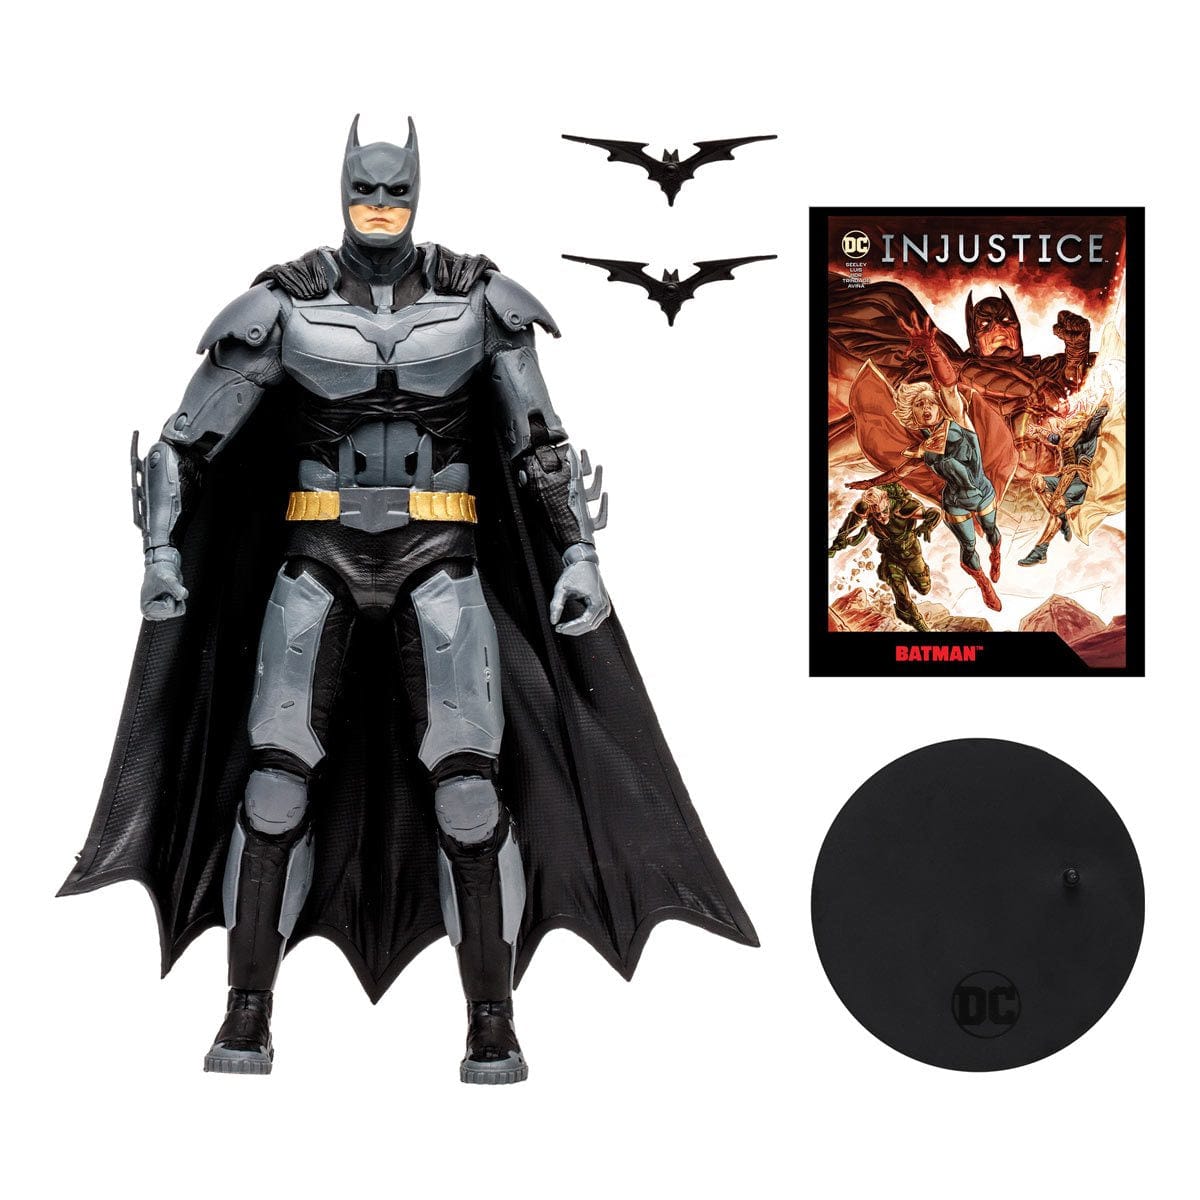 Injustice 2 Batman Page Punchers 7-Inch Scale Action Figure with Injustice Comic Book With accessories 